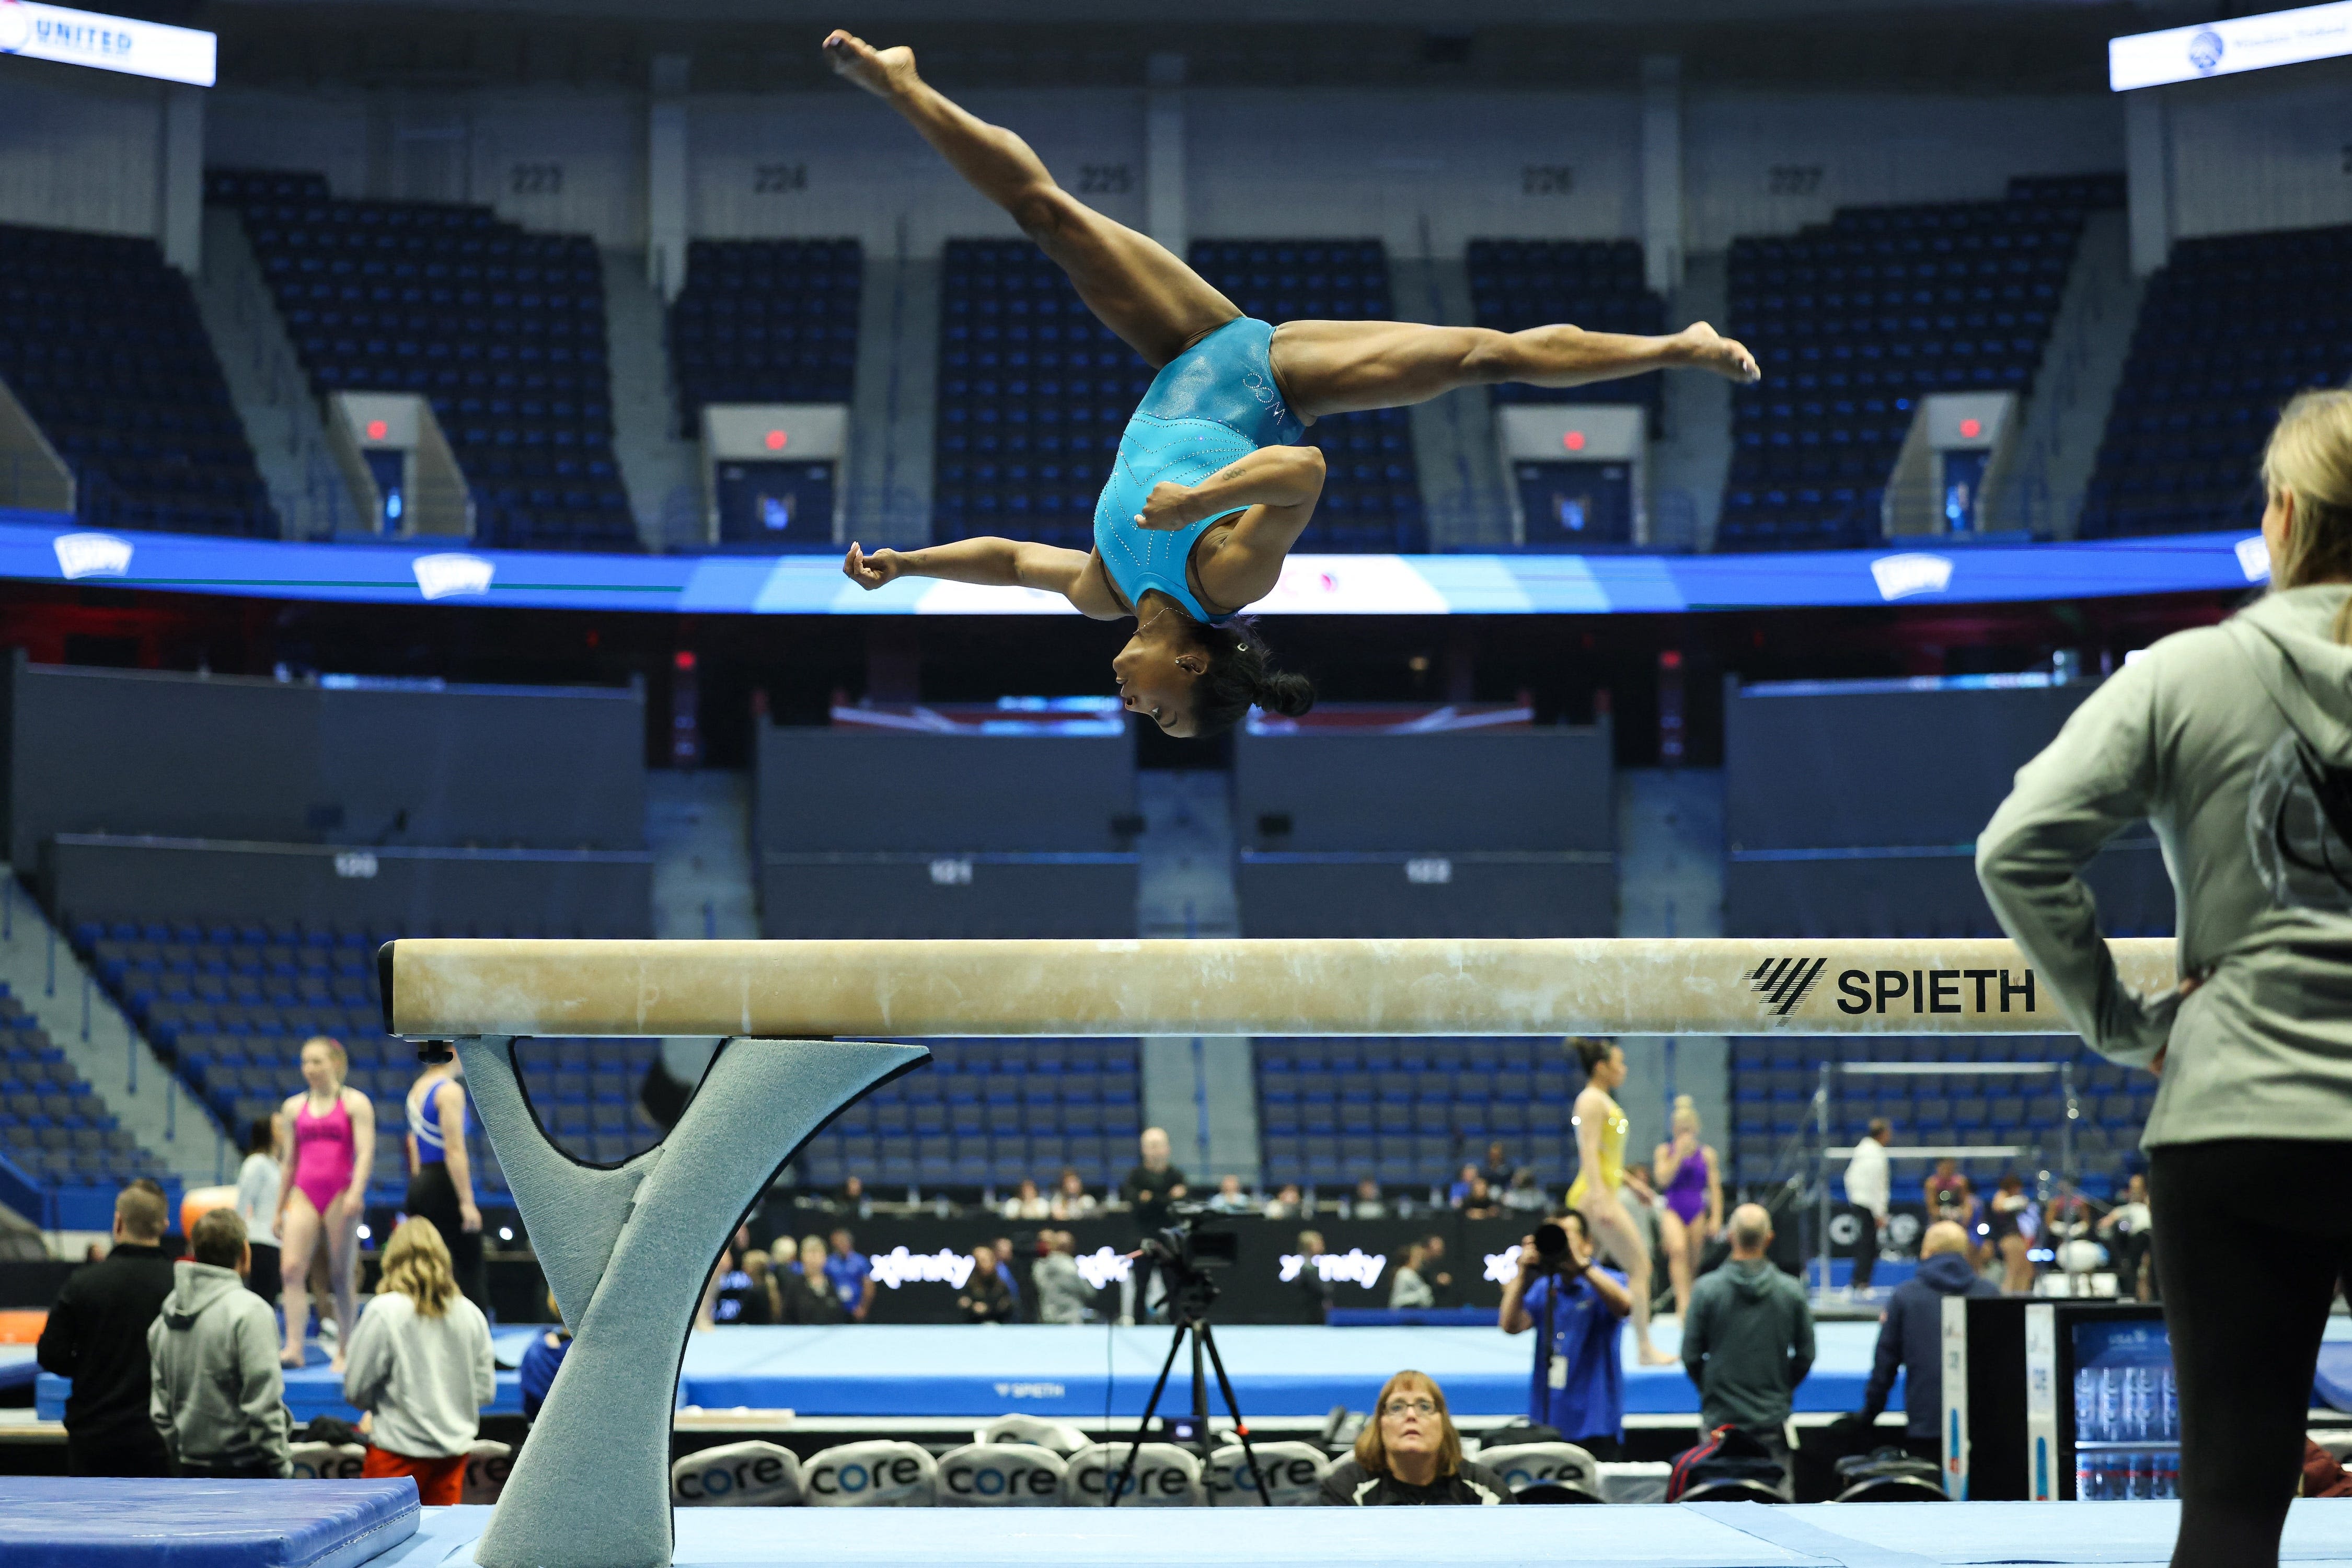 What's it like to train with Simone Biles every day? We asked her teammates.